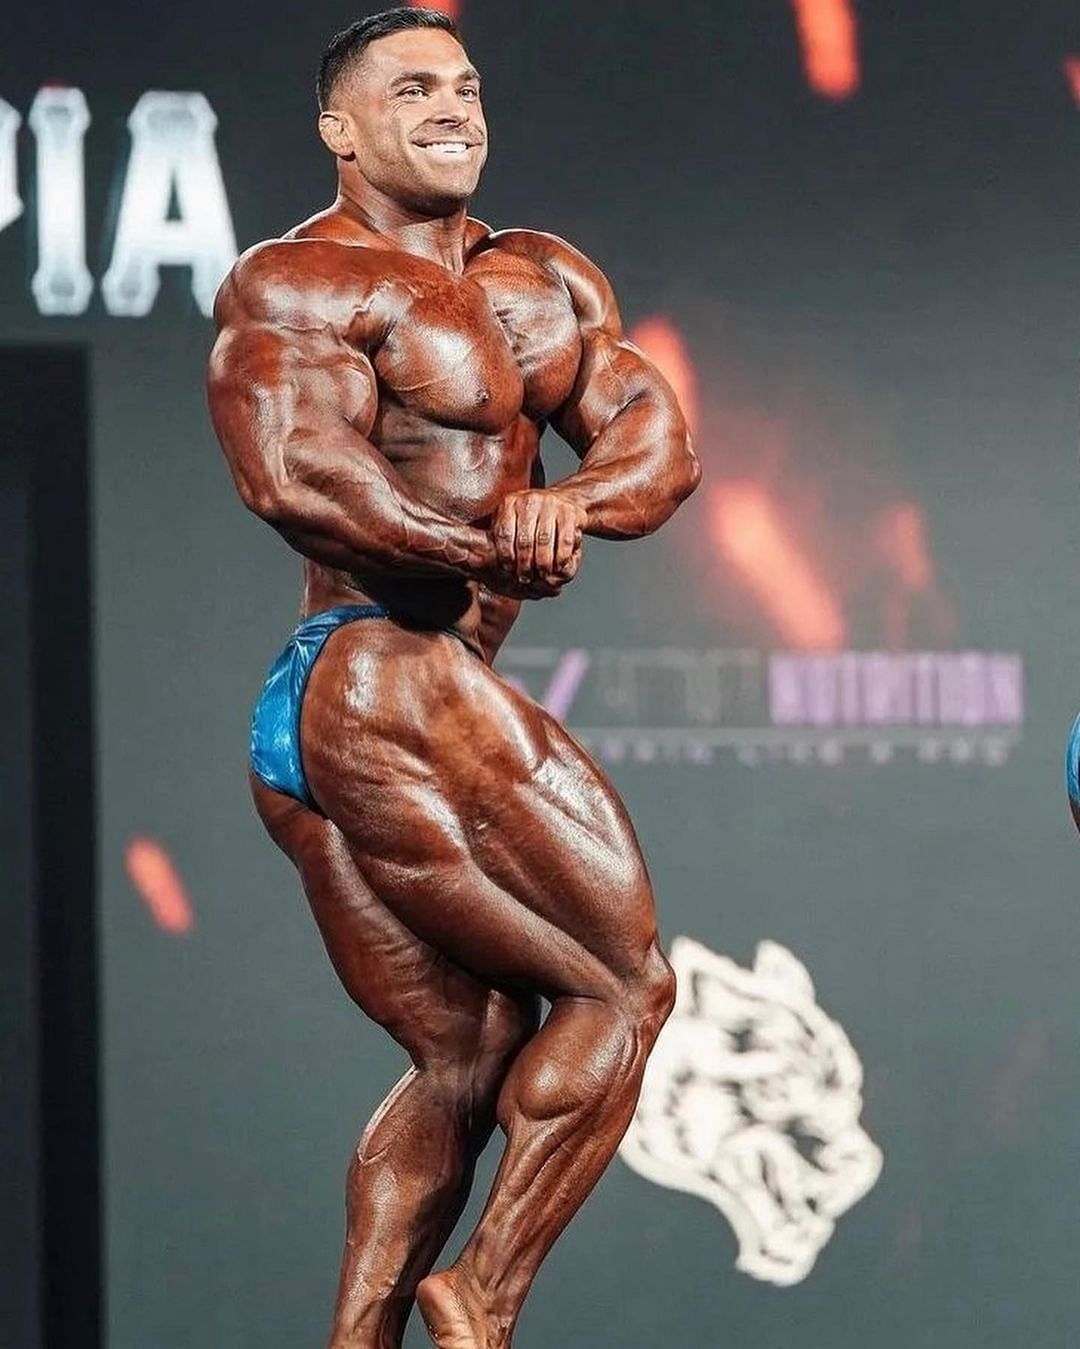 Lunsford poses on stage at the 2022 Mr. Olympia (Image via Instagram/@dereklunsford_)